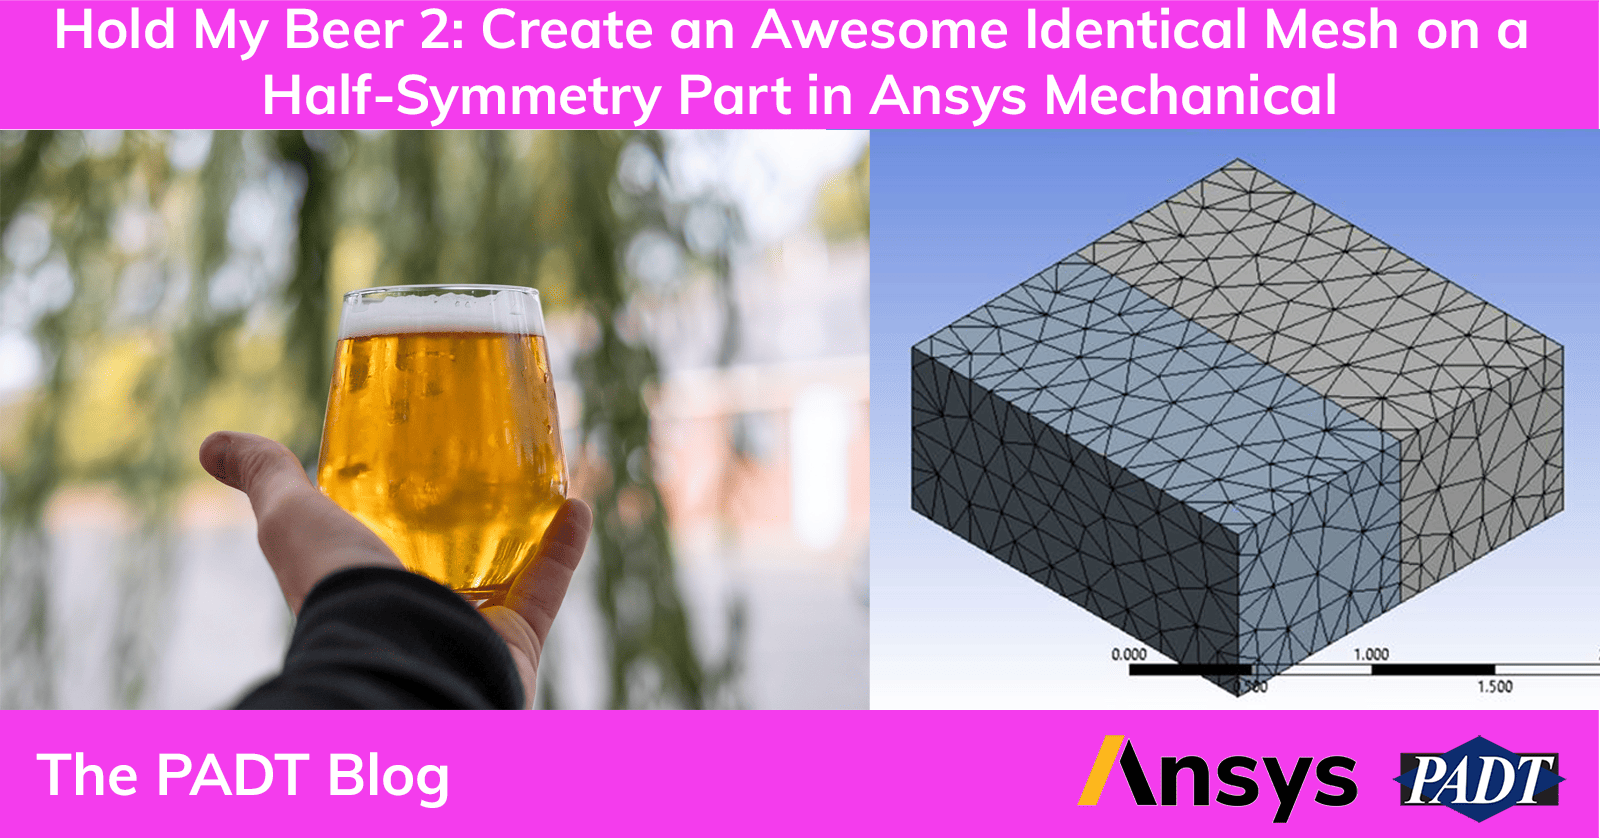 Hold My Beer: Creating an Identical Mesh on a Half-Symmetry Part in Ansys Mechanical Figure 1